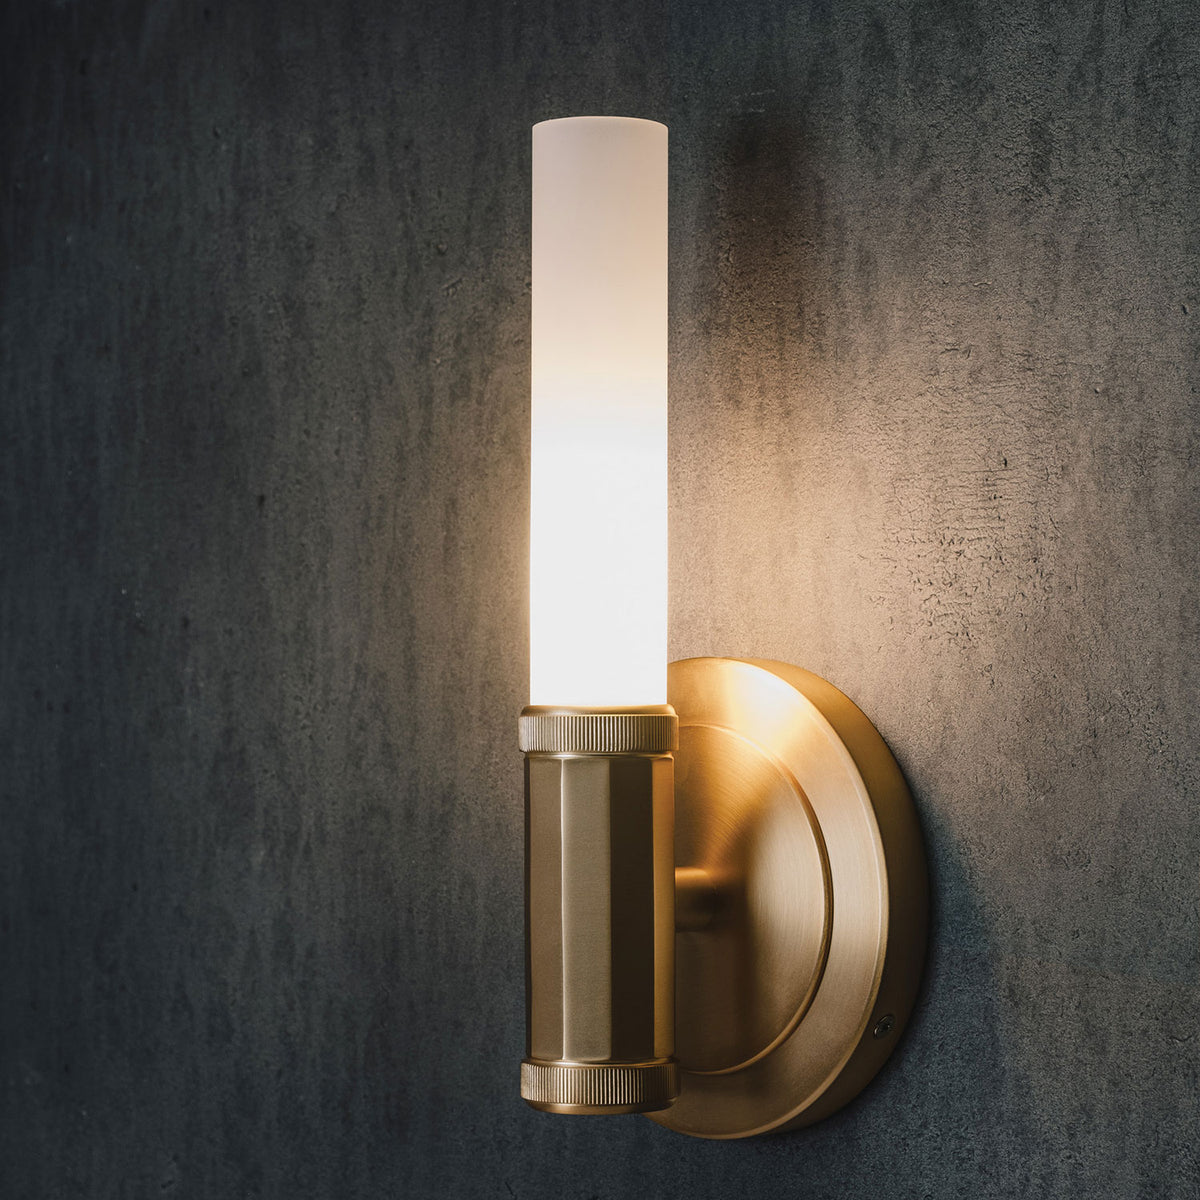 Elemental Facet Tee Sconce in aged brass image 3 of 6